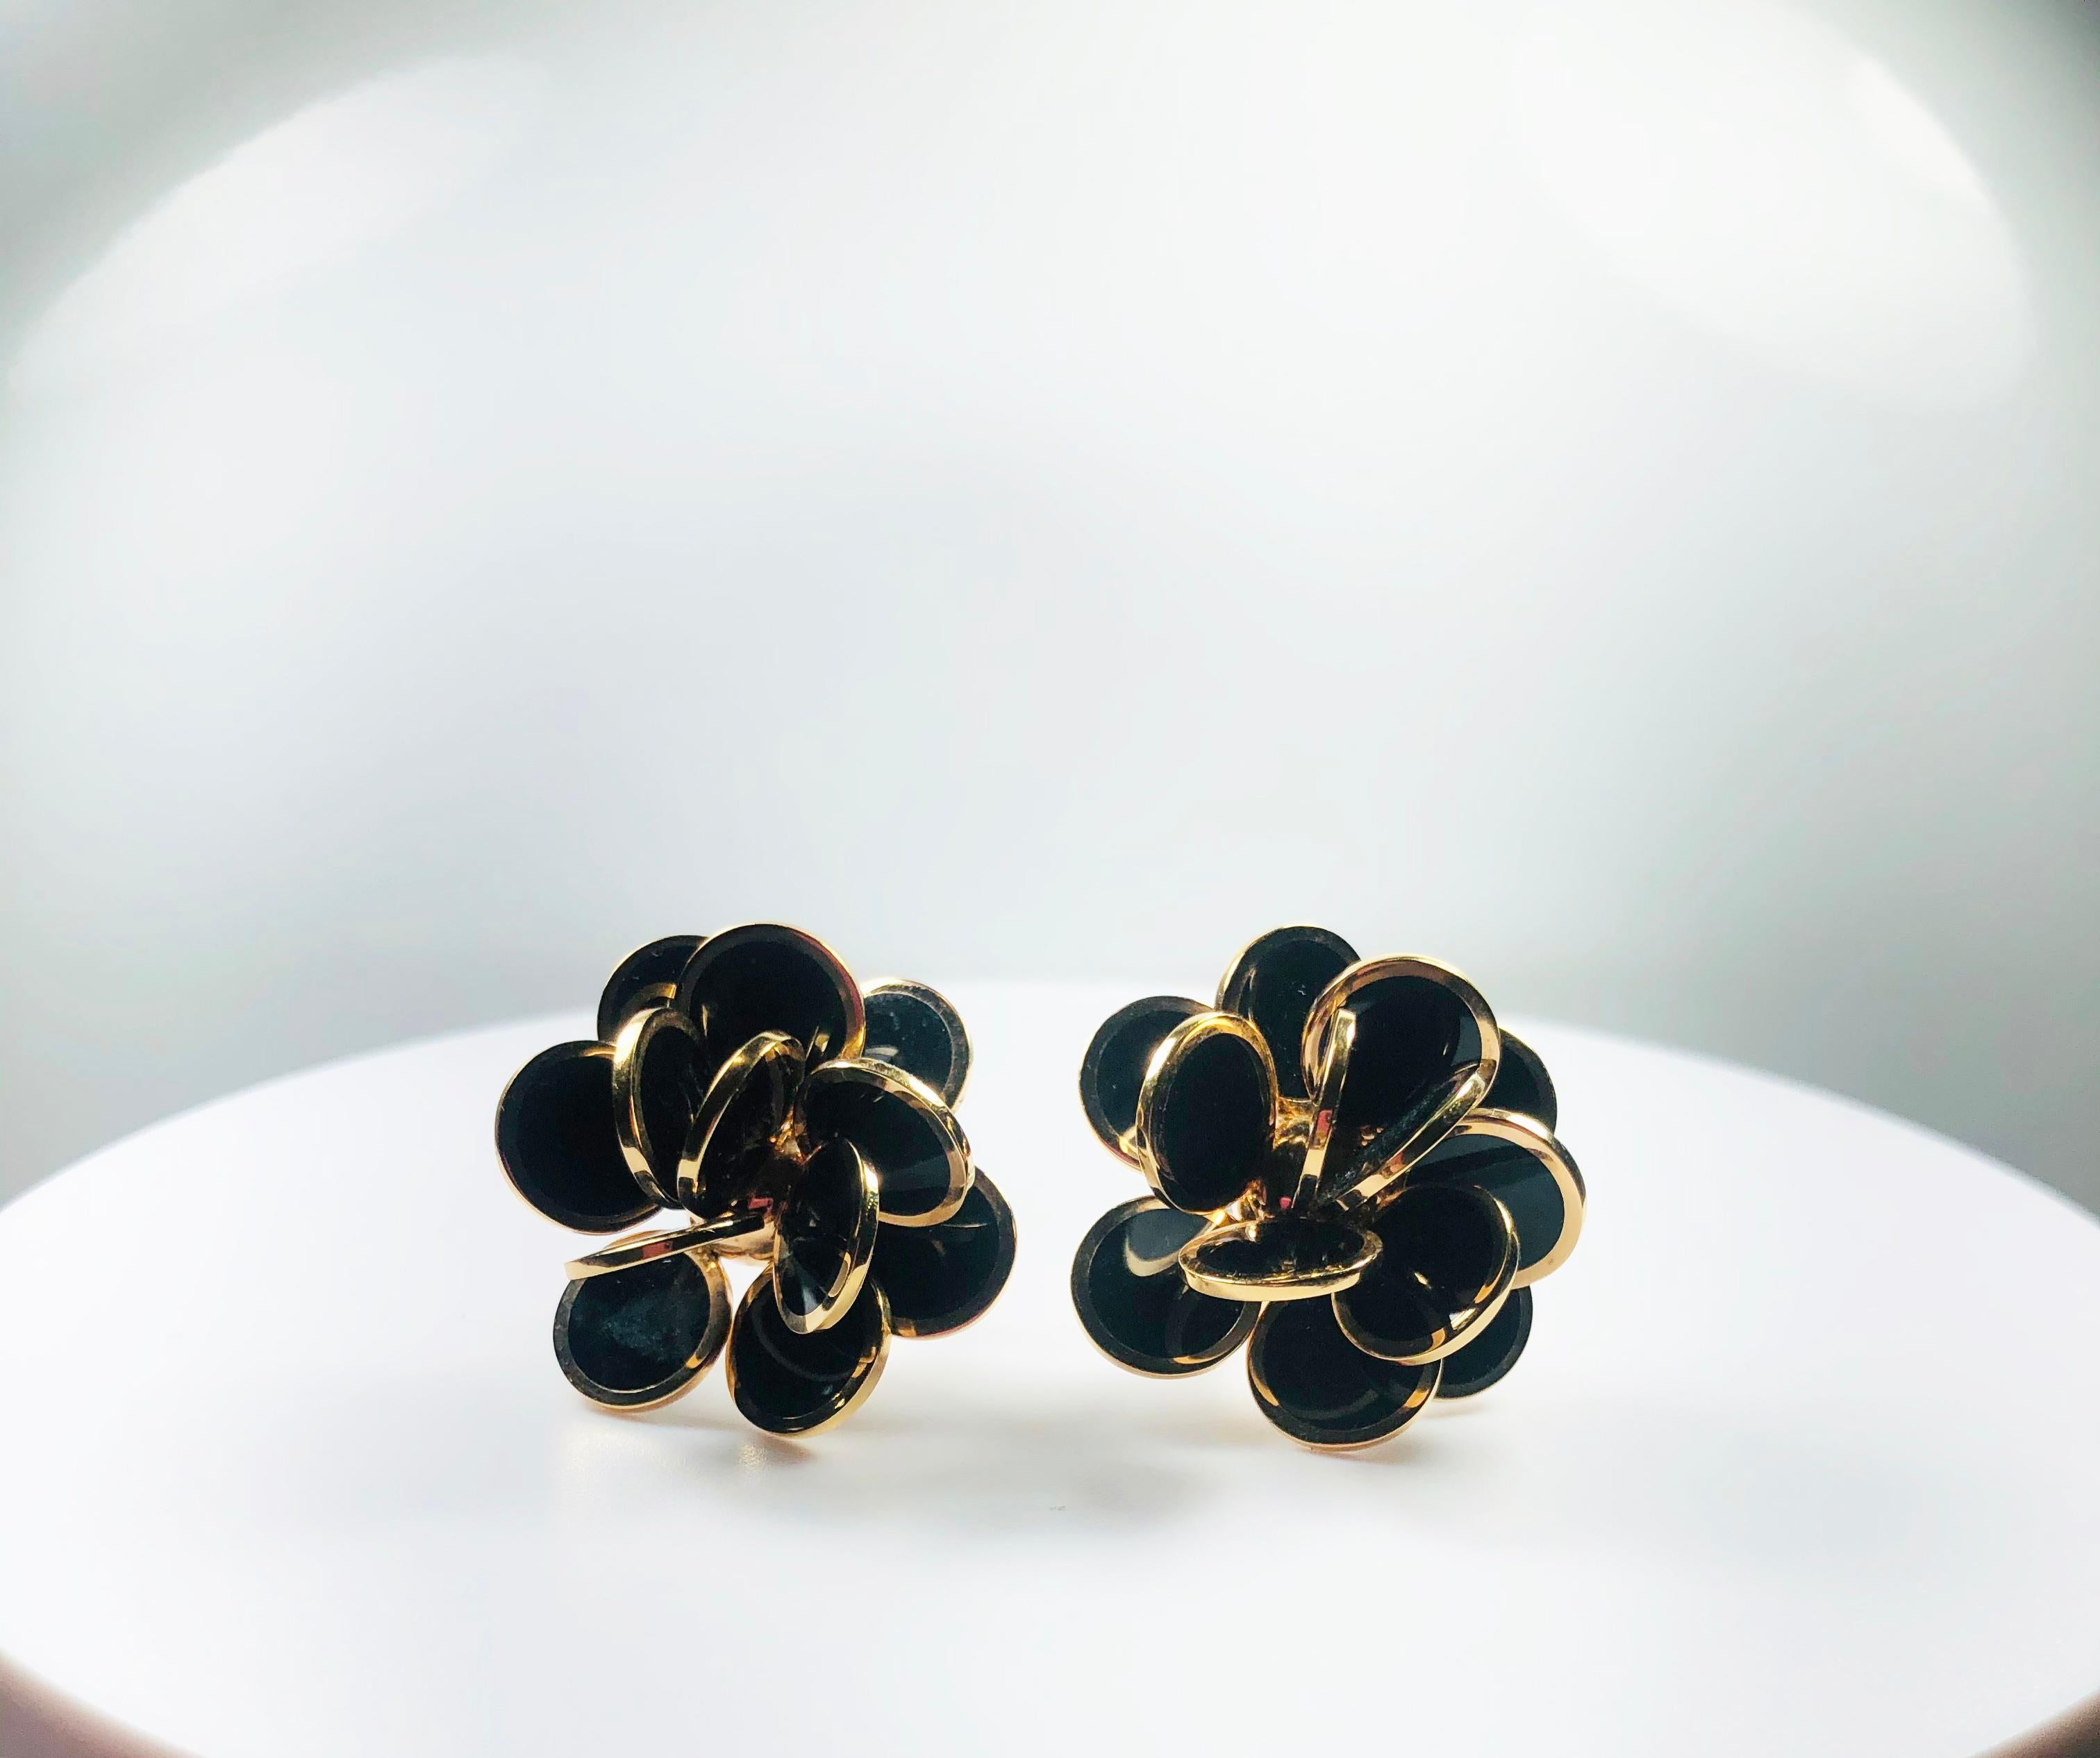 Chantecler Black Pailletes Earrings, a glitttering bouquet of precious petals, enriched by enamels encircled by rose gold.
Weight 22gr.

Inspired by the caprese Dolce Vita of the Fifties, Paillettes is the epitome of a happy and free era. 
The